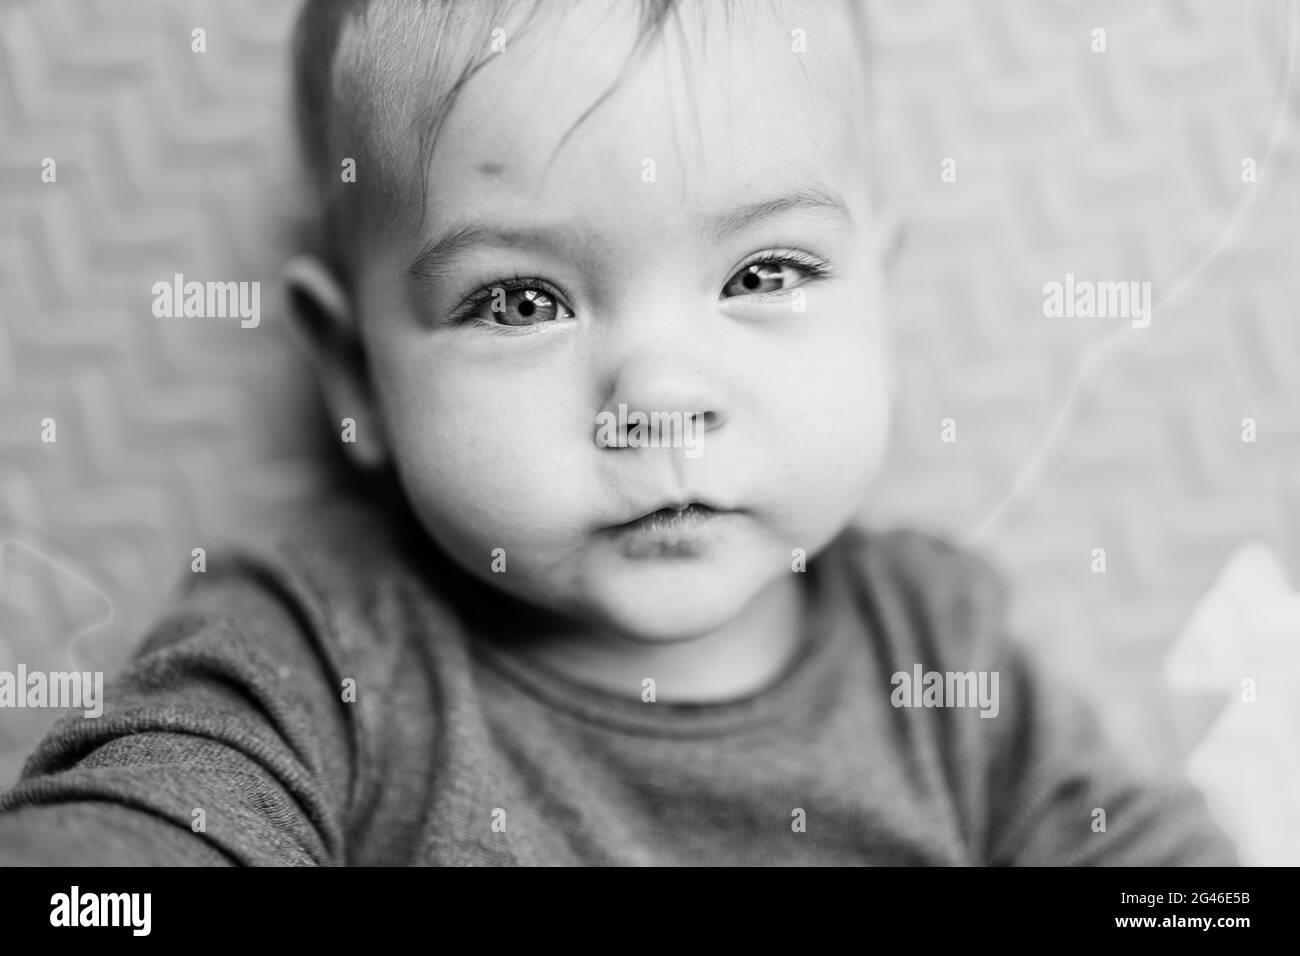 Tiny baby in a white bodysuit is lying on a rug. Portrait. Close-up. Black and white photo Stock Photo